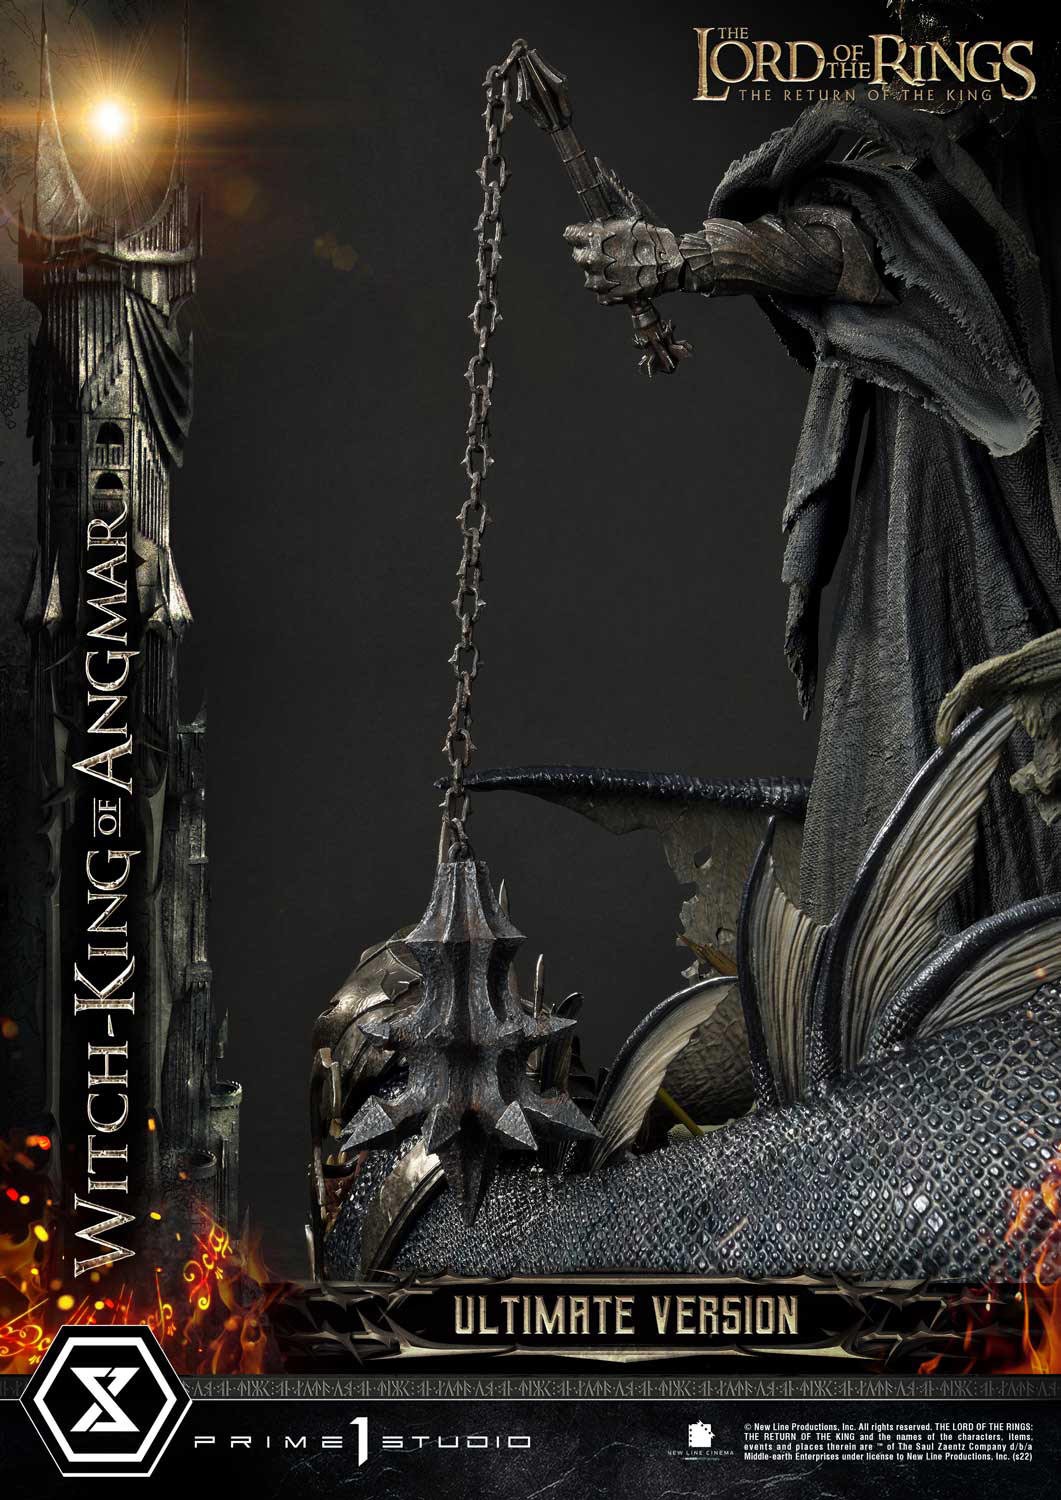 Witch-King of Angmar (Ultimate Version)